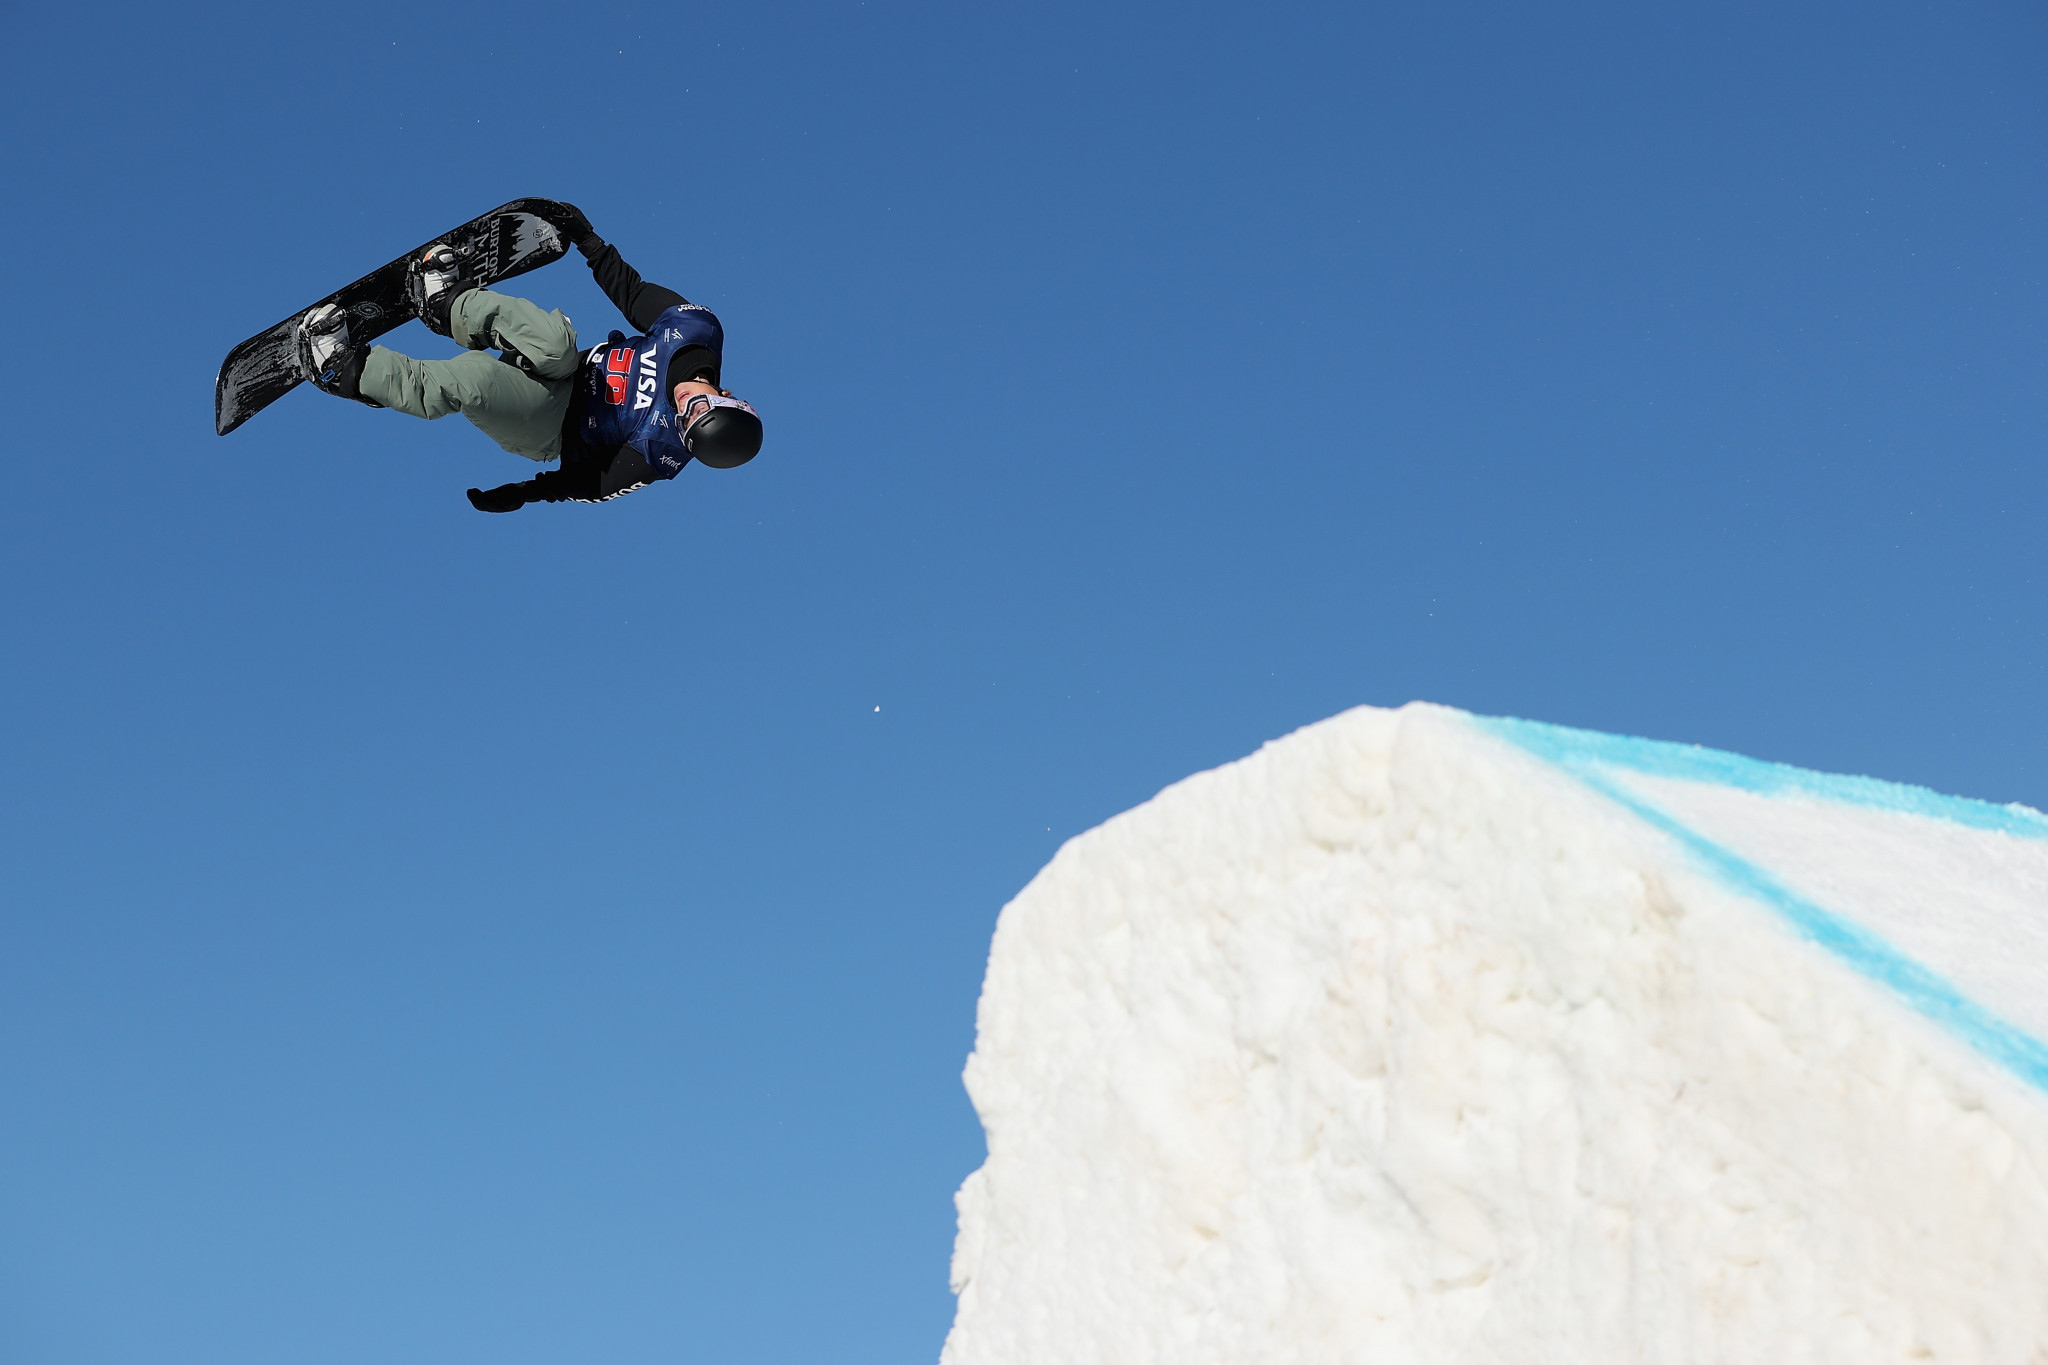 Särkipaju and Hrones upgrade from snowboard big air silver to slopestyle gold at Winter EYOF